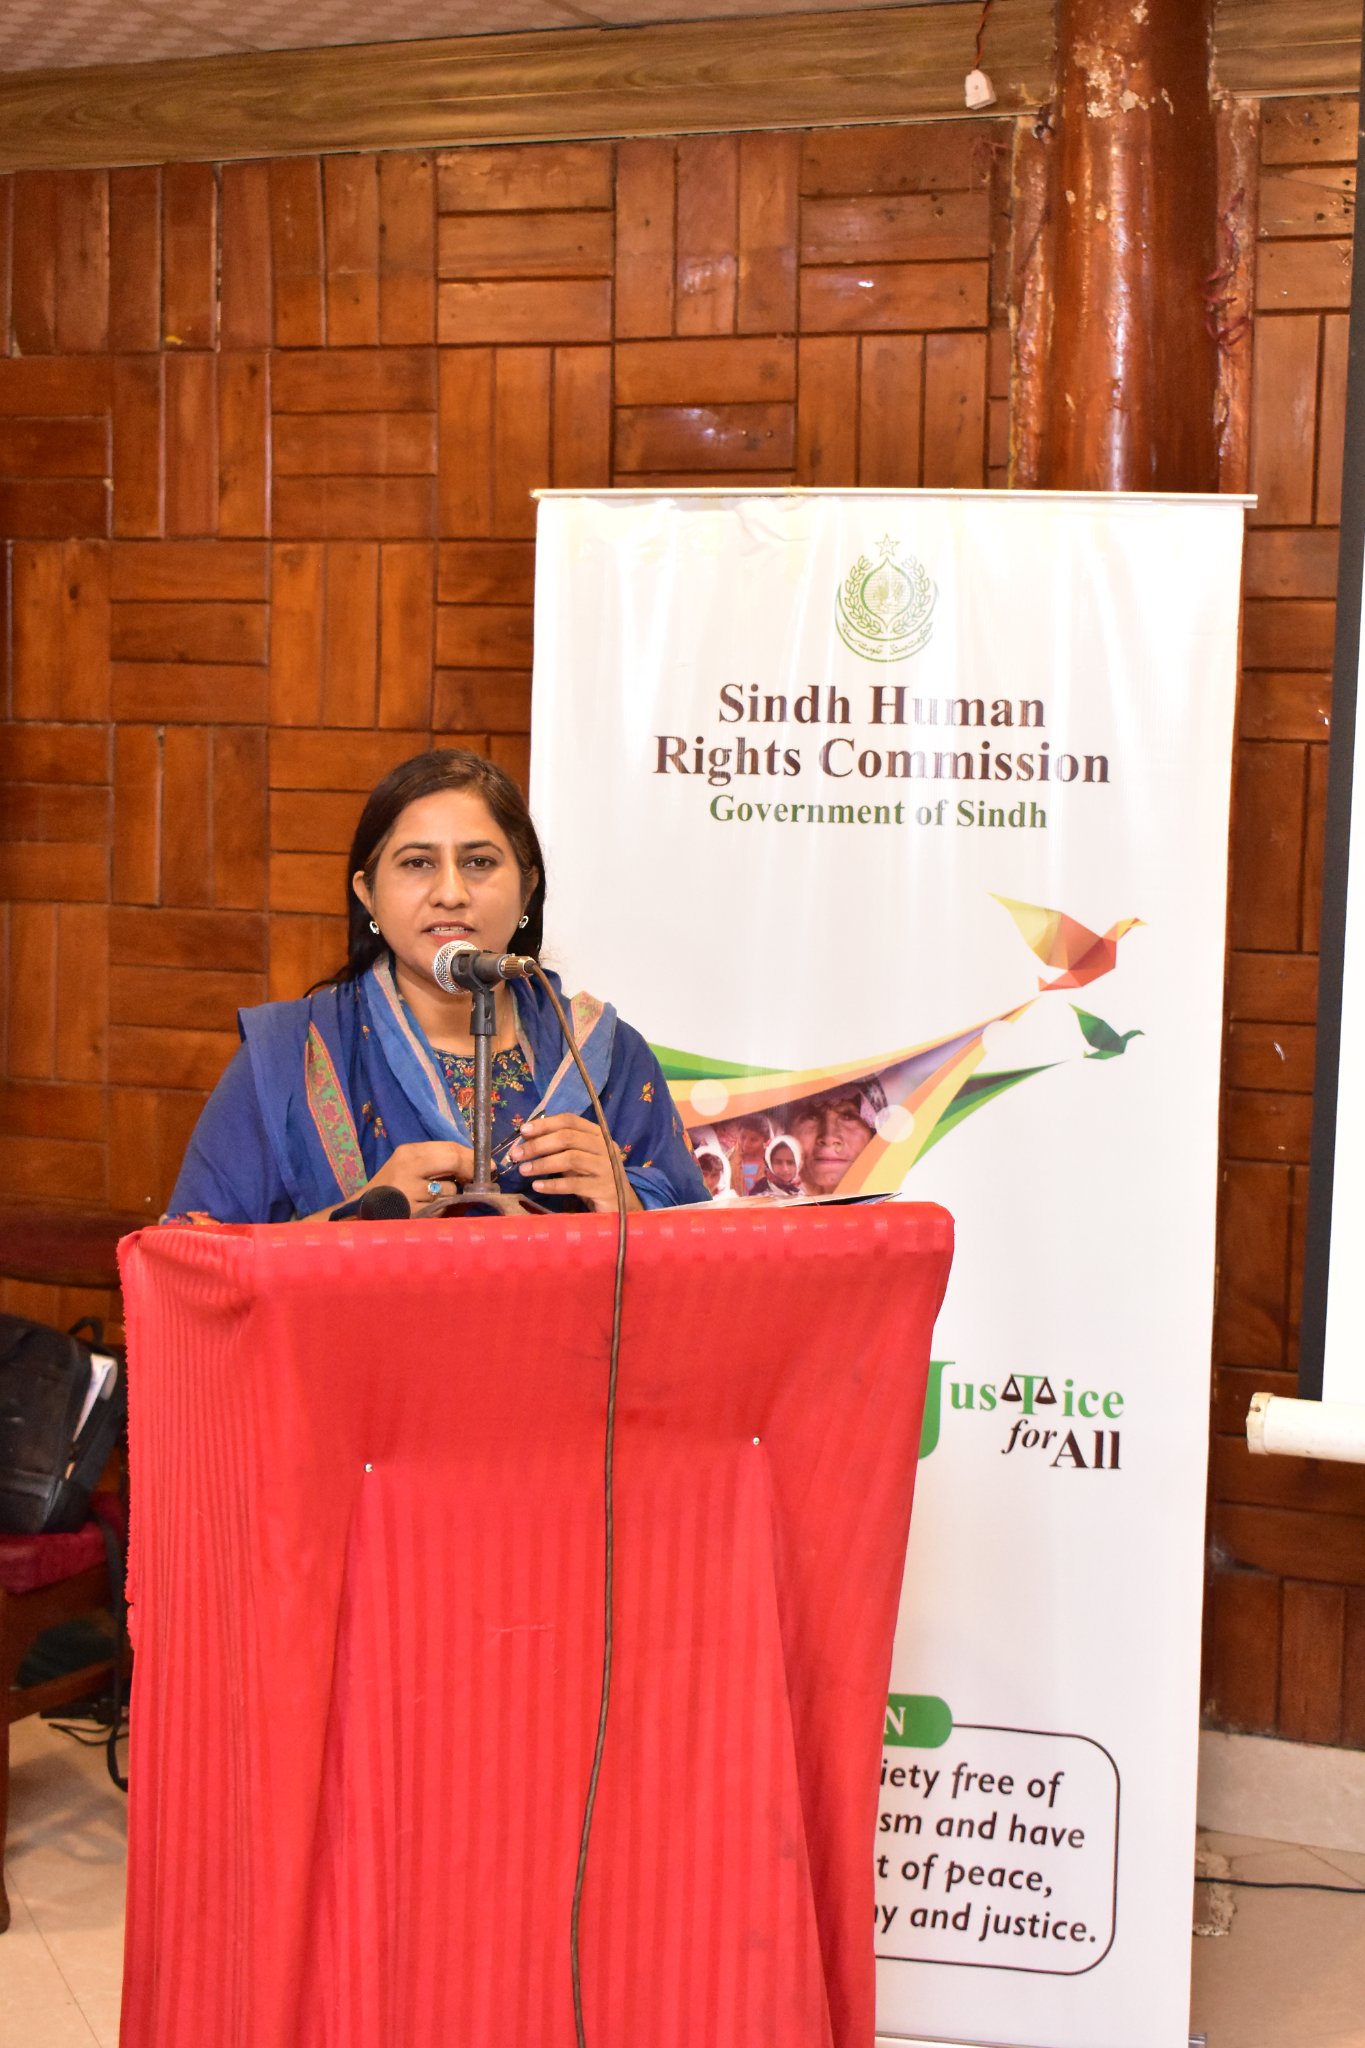 Training on The Sindh Hindu Marriage Act 2018 - Shaheed Benazir Abad